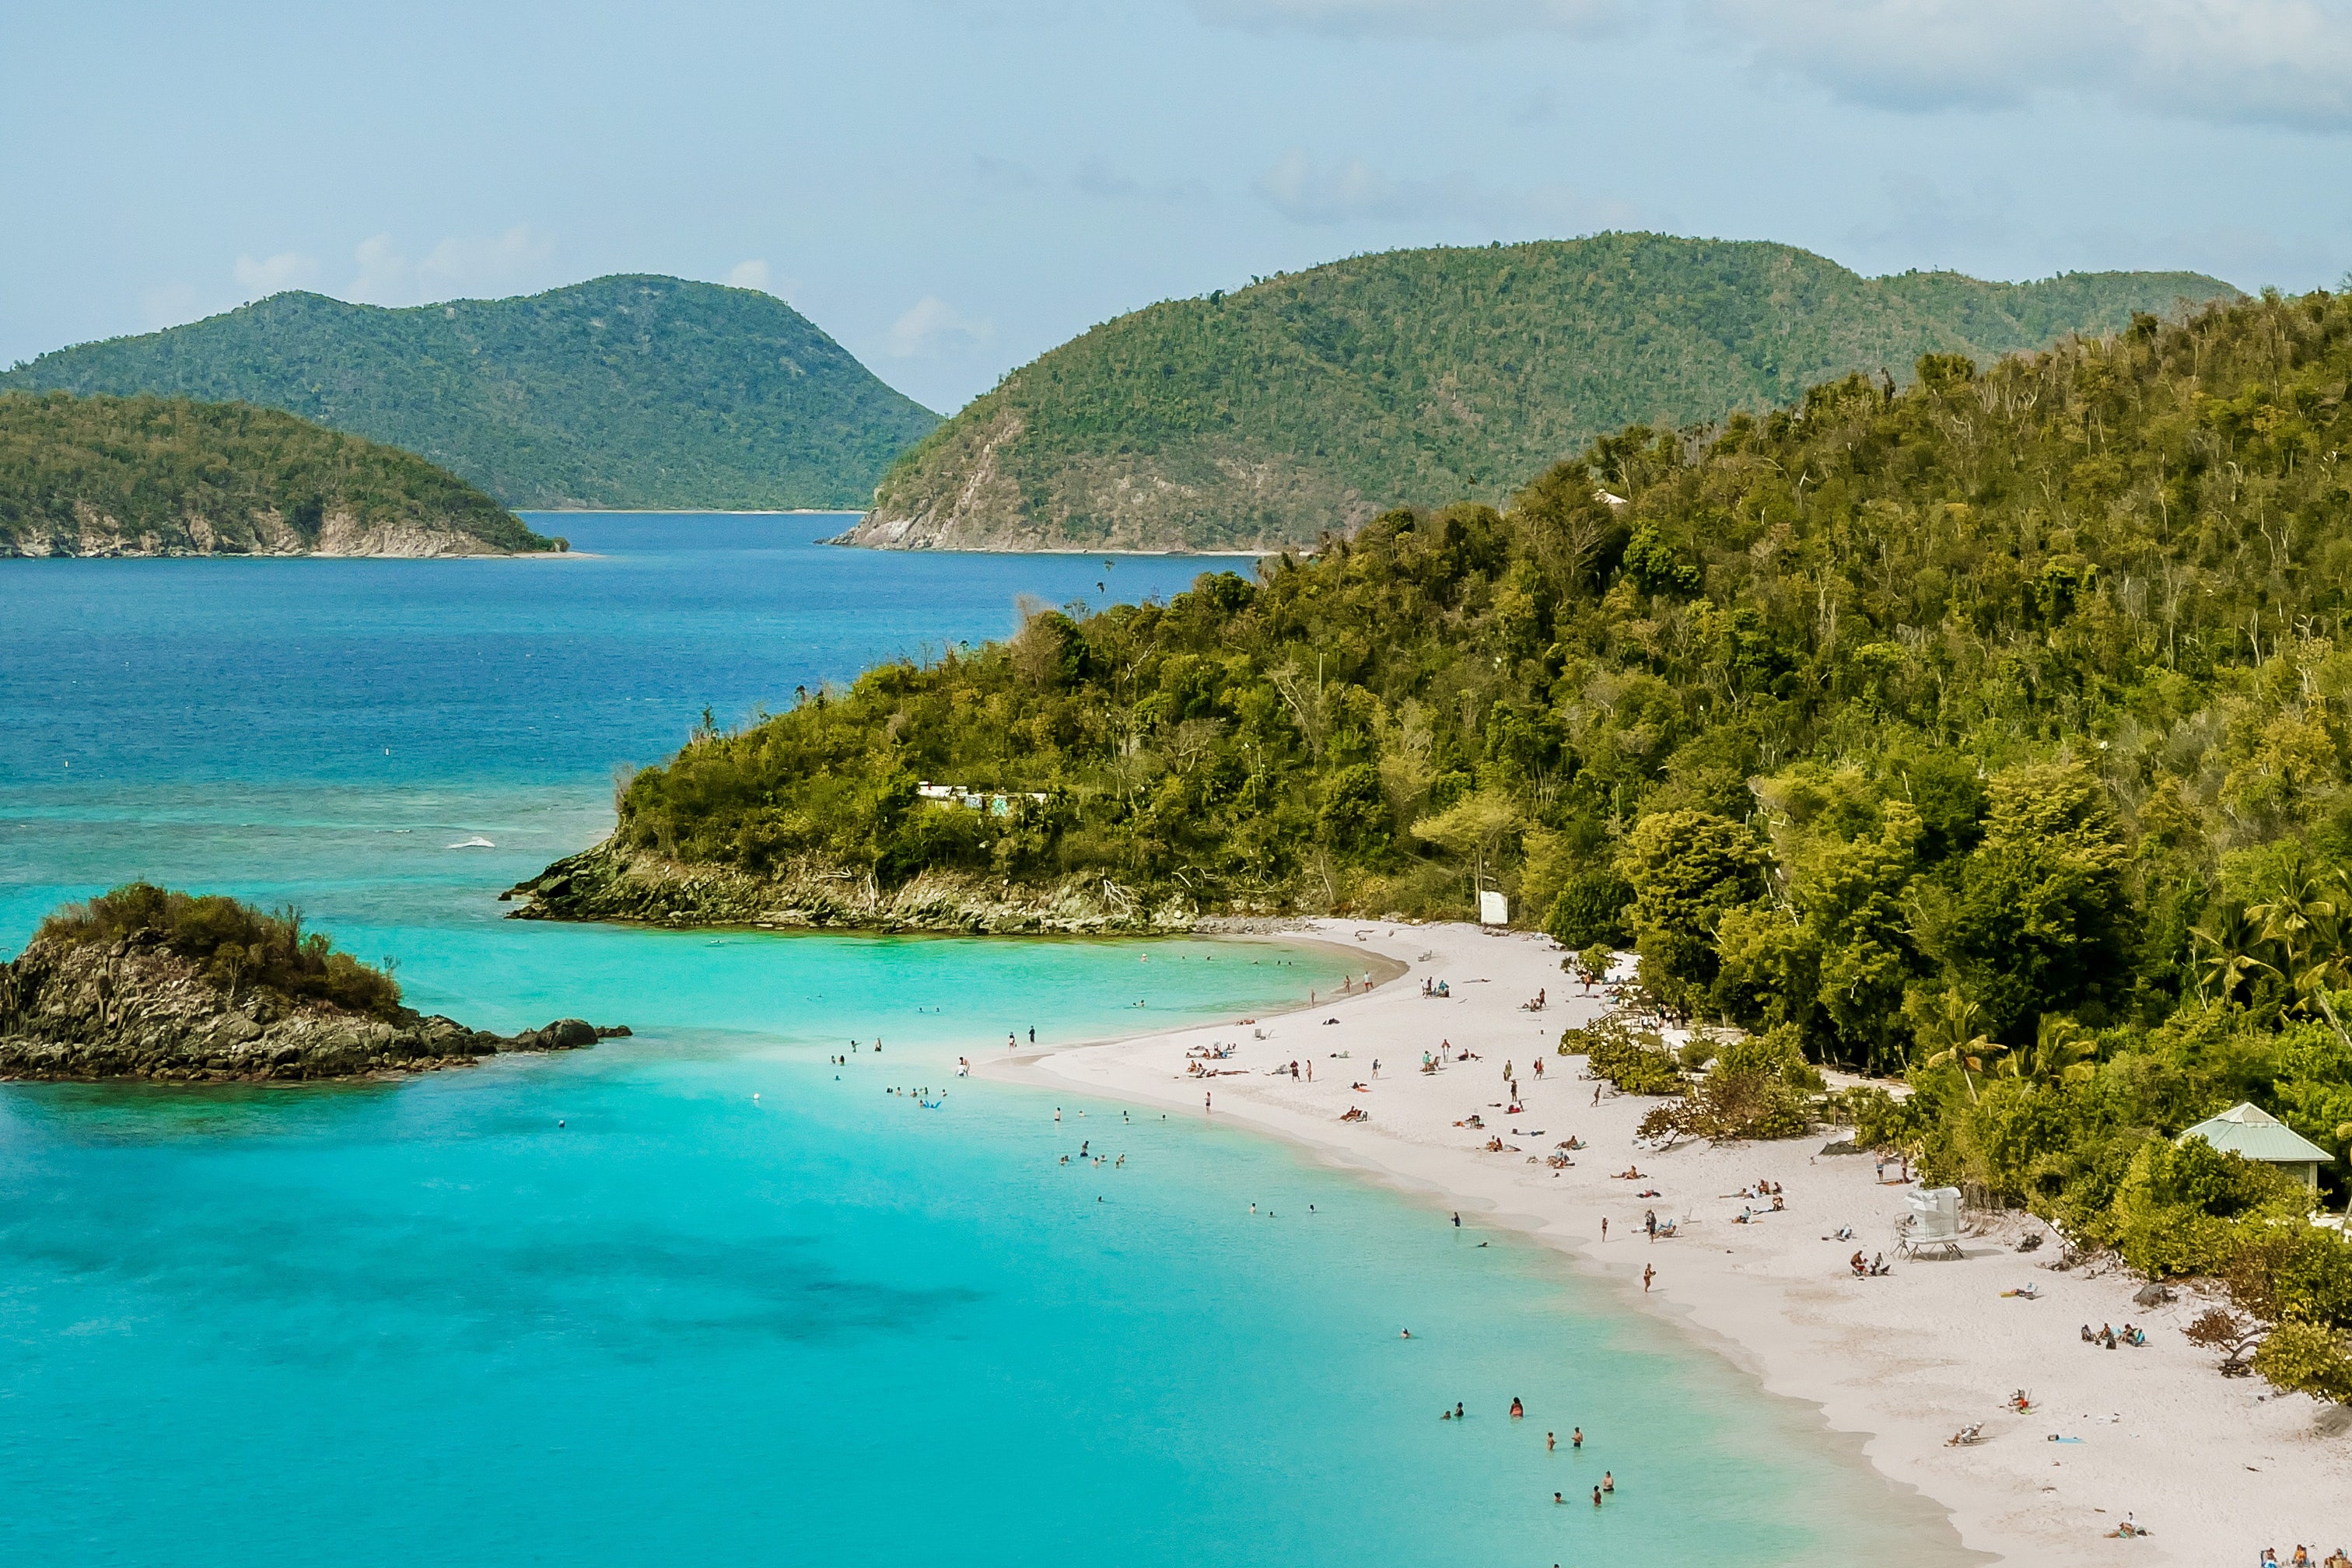 <p>No matter what kind of vacation you’re craving, you’ll find it on one of the U.S. Virgin Islands. St. John gets accolades for its natural beauty—particularly Trunk Bay in the Virgin Islands National Park, and the snorkeling spots in the Virgin Islands Coral Reef Monument.</p> <p>If you’re an <a href="http://www.cntraveler.com/story/alexander-hamiltons-guide-to-the-caribbean?mbid=synd_msn_rss&utm_source=msn&utm_medium=syndication">Alexander Hamilton fan</a>, head to St. Croix where the U.S. founding father spent much of his youth. Or, if you’re heading to St. Thomas, make sure to book a room at the incredible <a href="https://www.cntraveler.com/hotels/united-states-virgin-islands/st-thomas/ritz-carlton-st-thomas?mbid=synd_msn_rss&utm_source=msn&utm_medium=syndication">Ritz-Carlton, St. Thomas</a>—complete with cruises on the resort’s private, 53-foot catamaran.</p><p>Sign up to receive the latest news, expert tips, and inspiration on all things travel</p><a href="https://www.cntraveler.com/newsletter/the-daily?sourceCode=msnsend">Inspire Me</a>